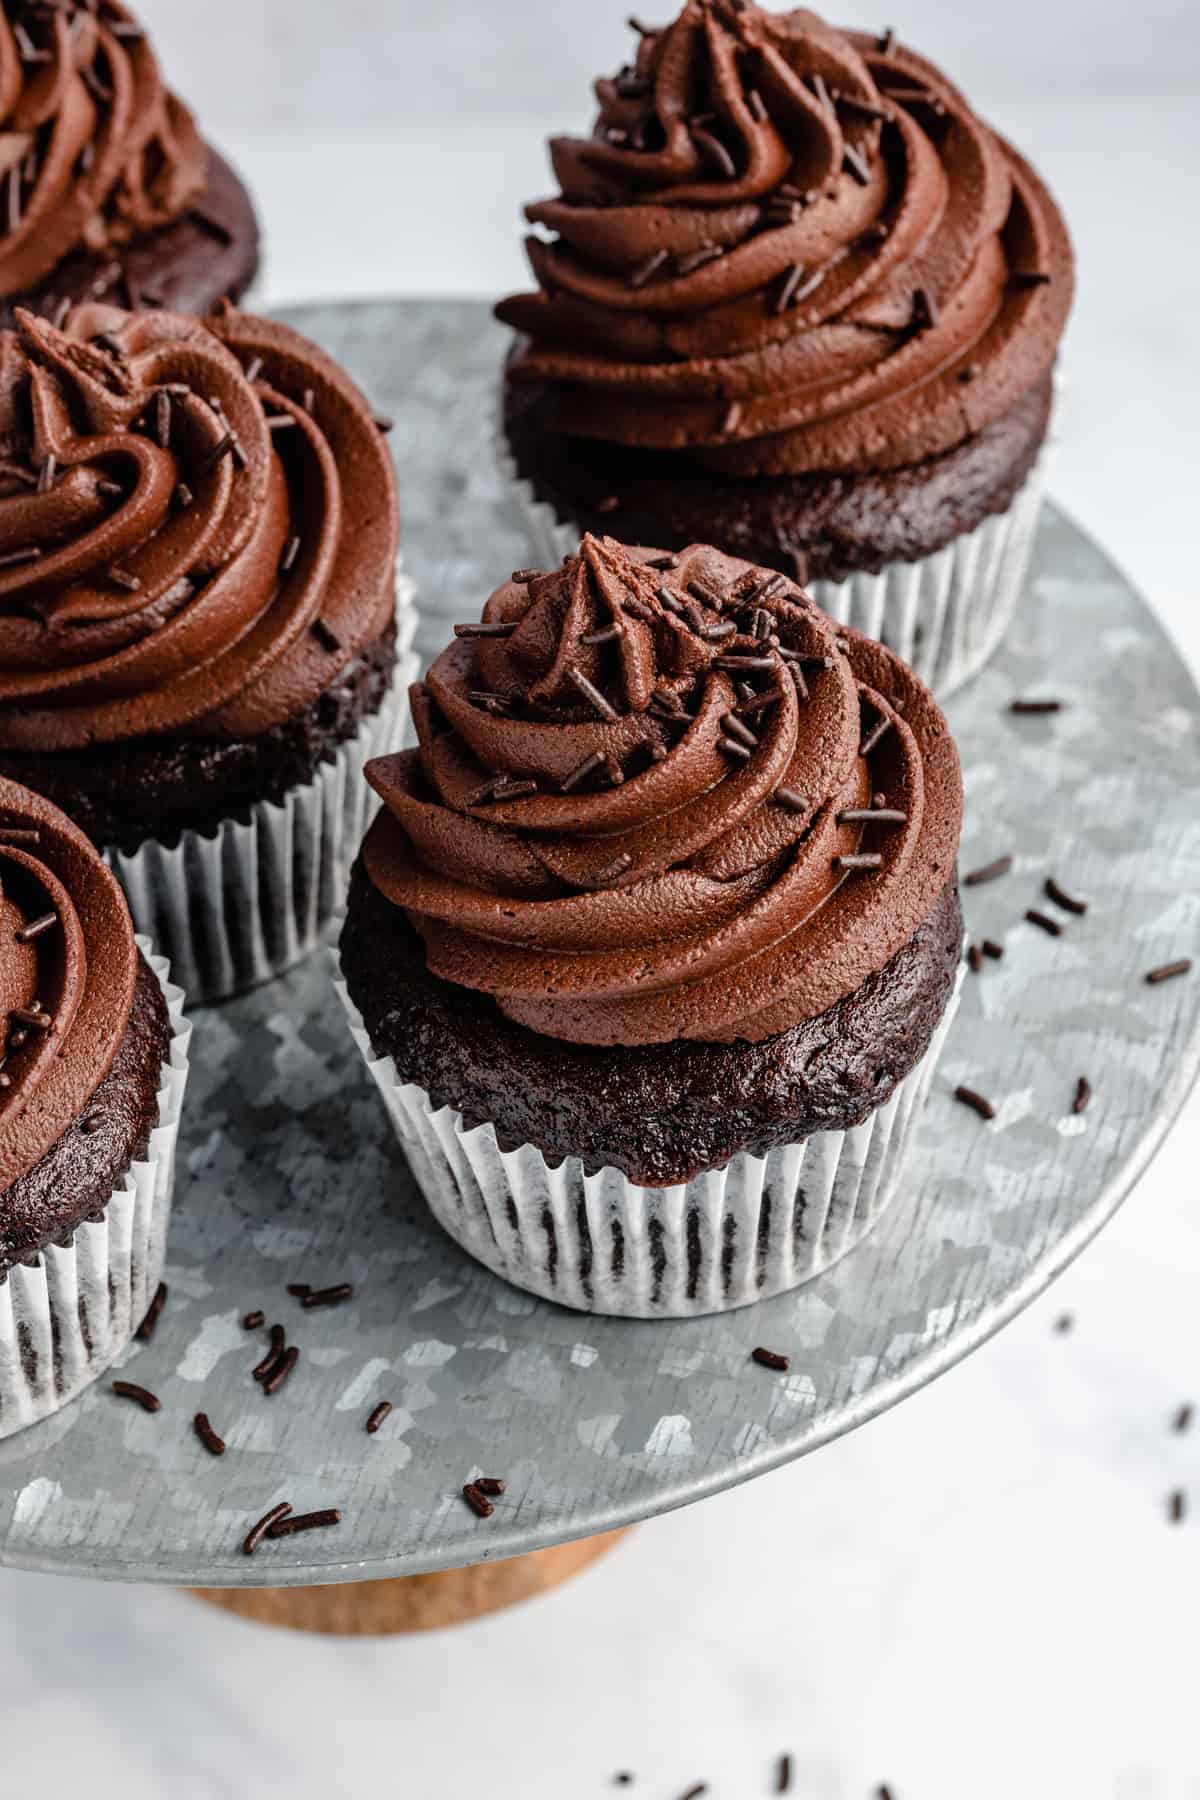 five chocolate cupcakes with frosting on a metal cake stand